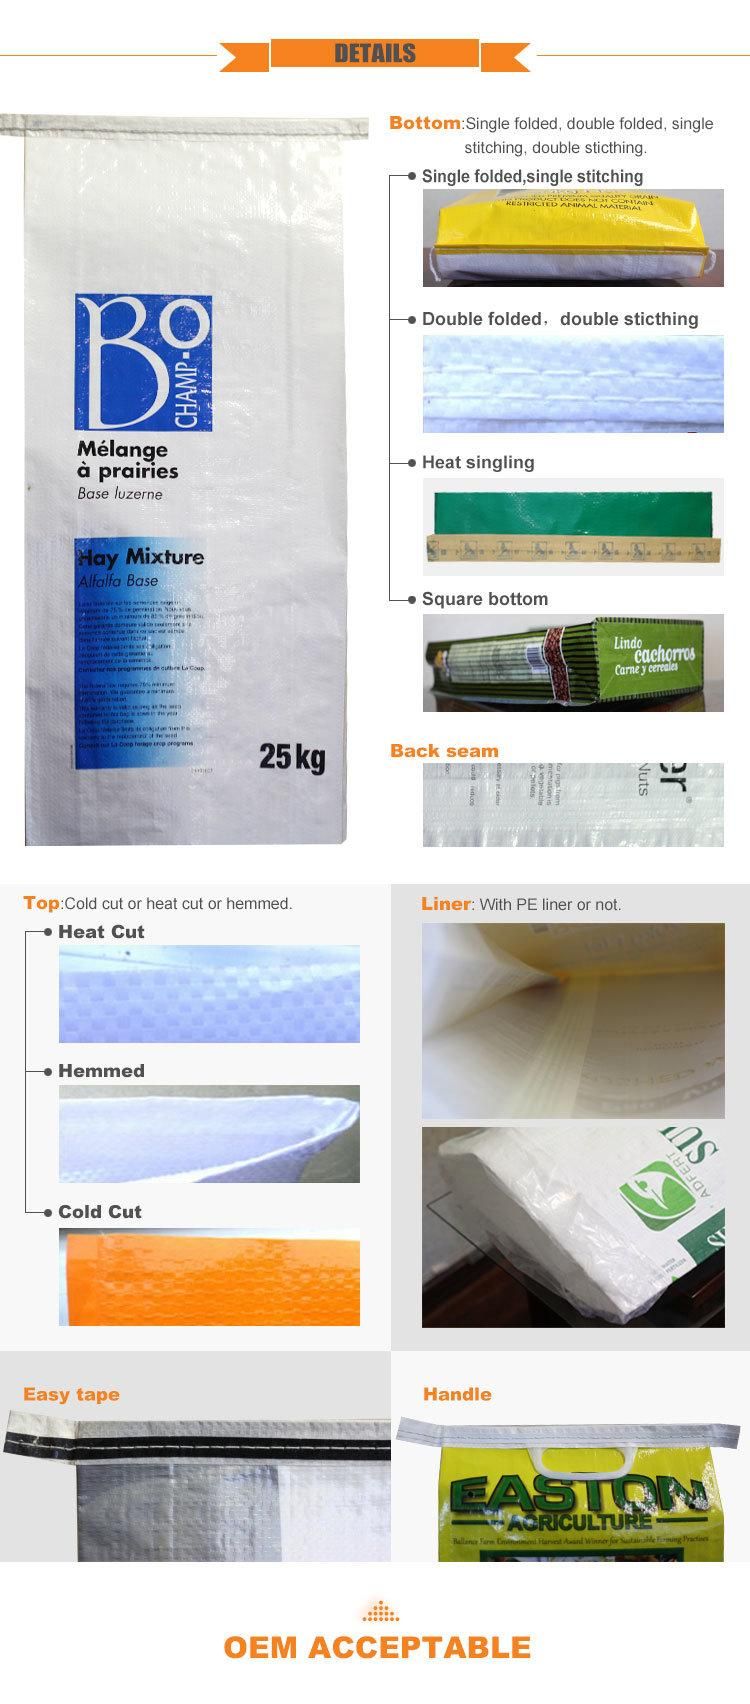 BOPP Laminated PP Woven Charcoal Bags Grass Seed Corn Bags 10 Kg 20kg 25kg